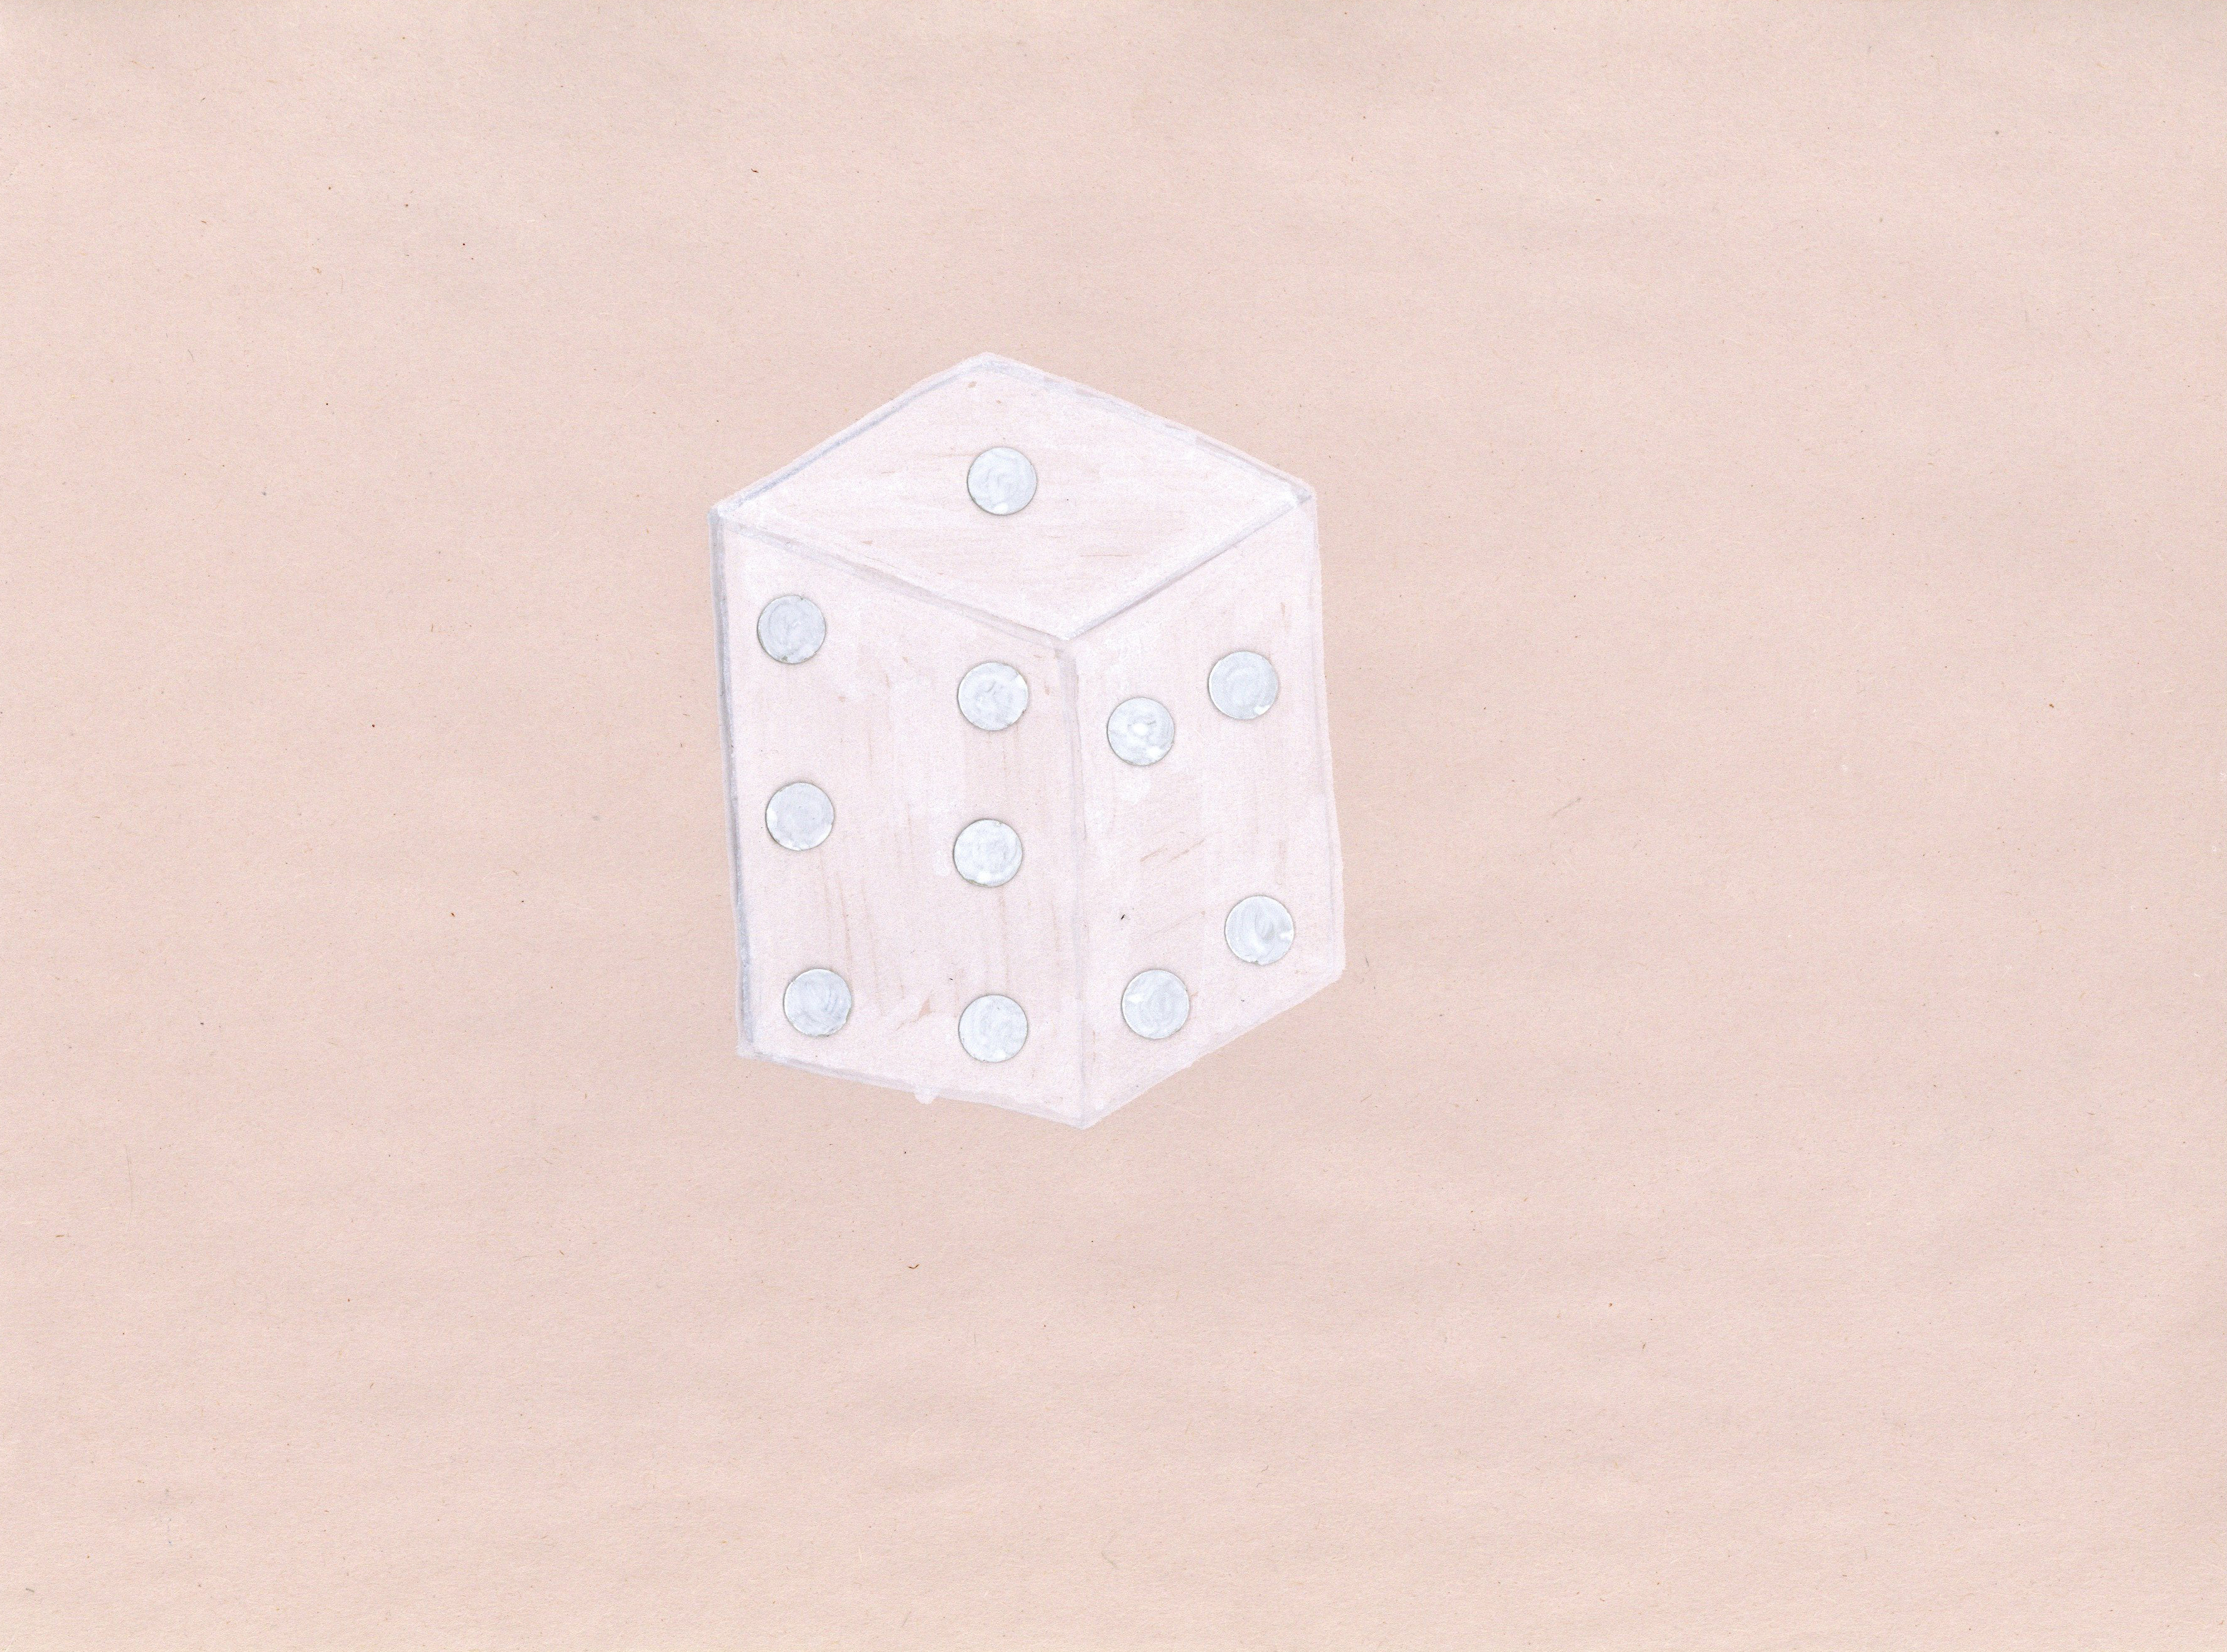 a six-sided die drawn in white on newsprint paper, with circular dots on each side also painted in white